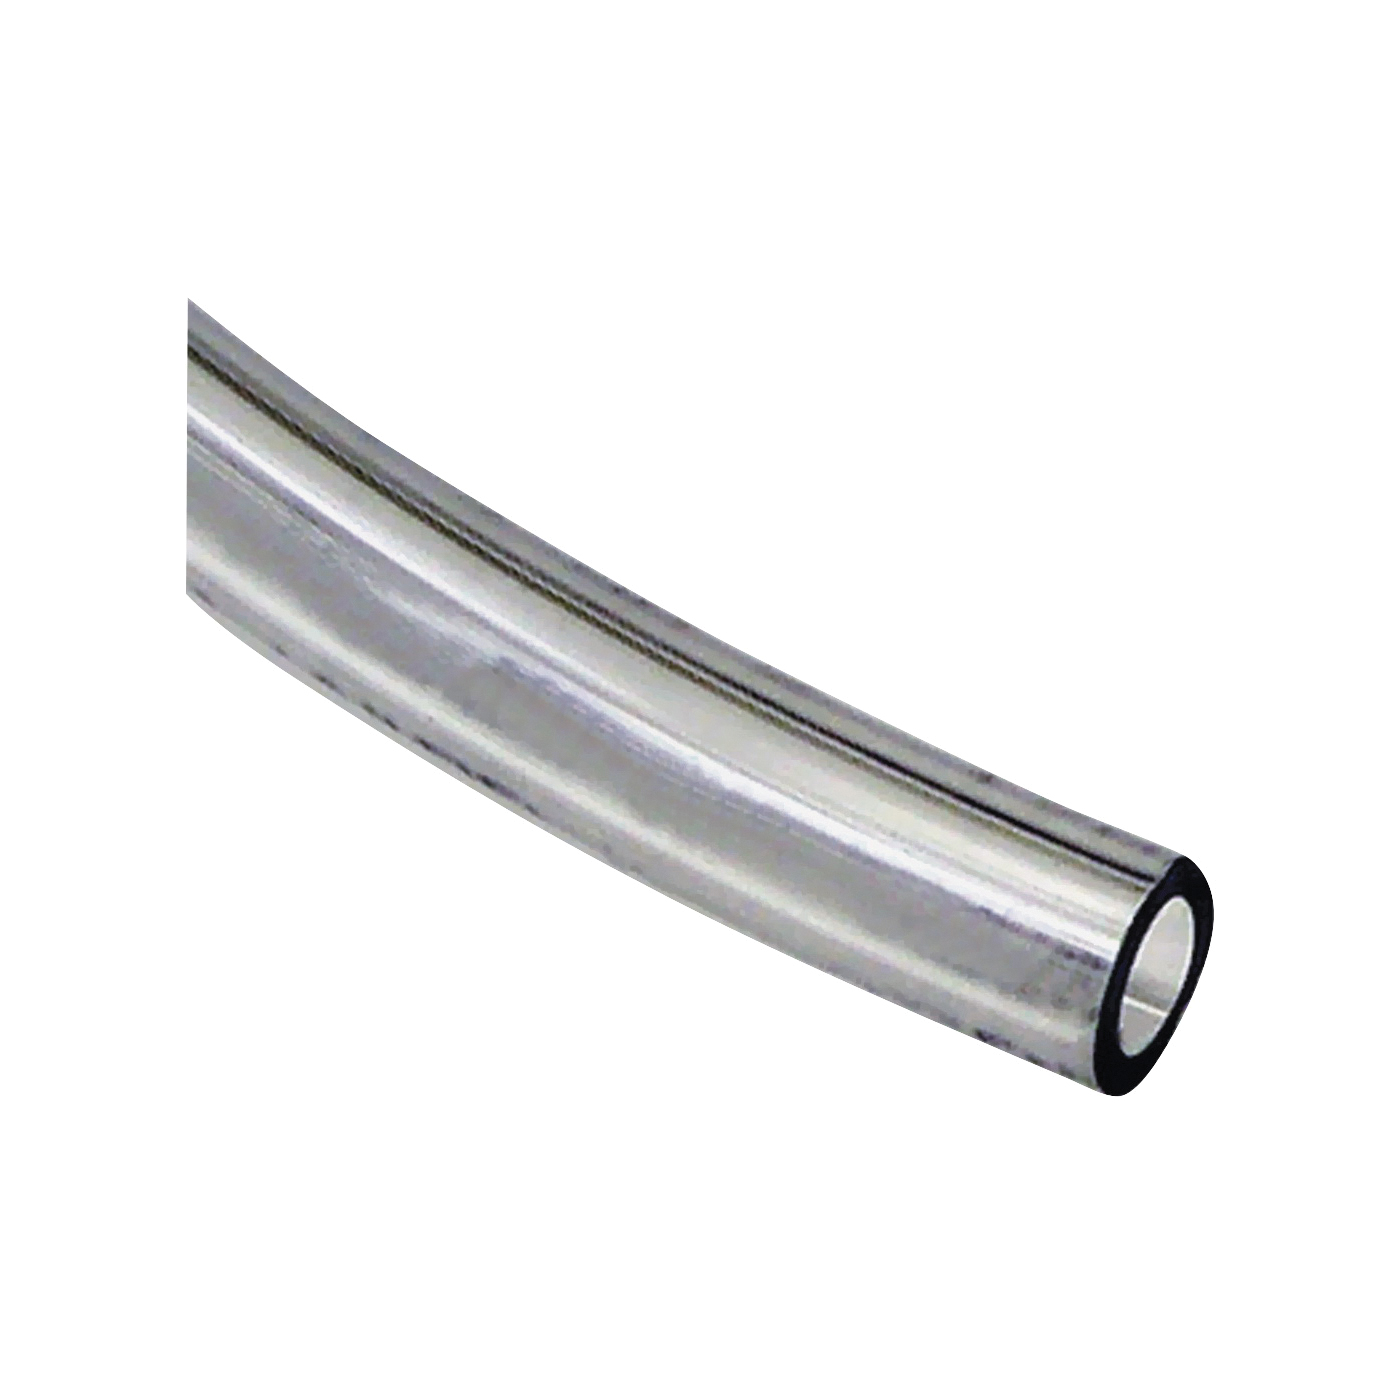 T10 T10005010 Tubing, 1/2 in ID, Clear, 100 ft L